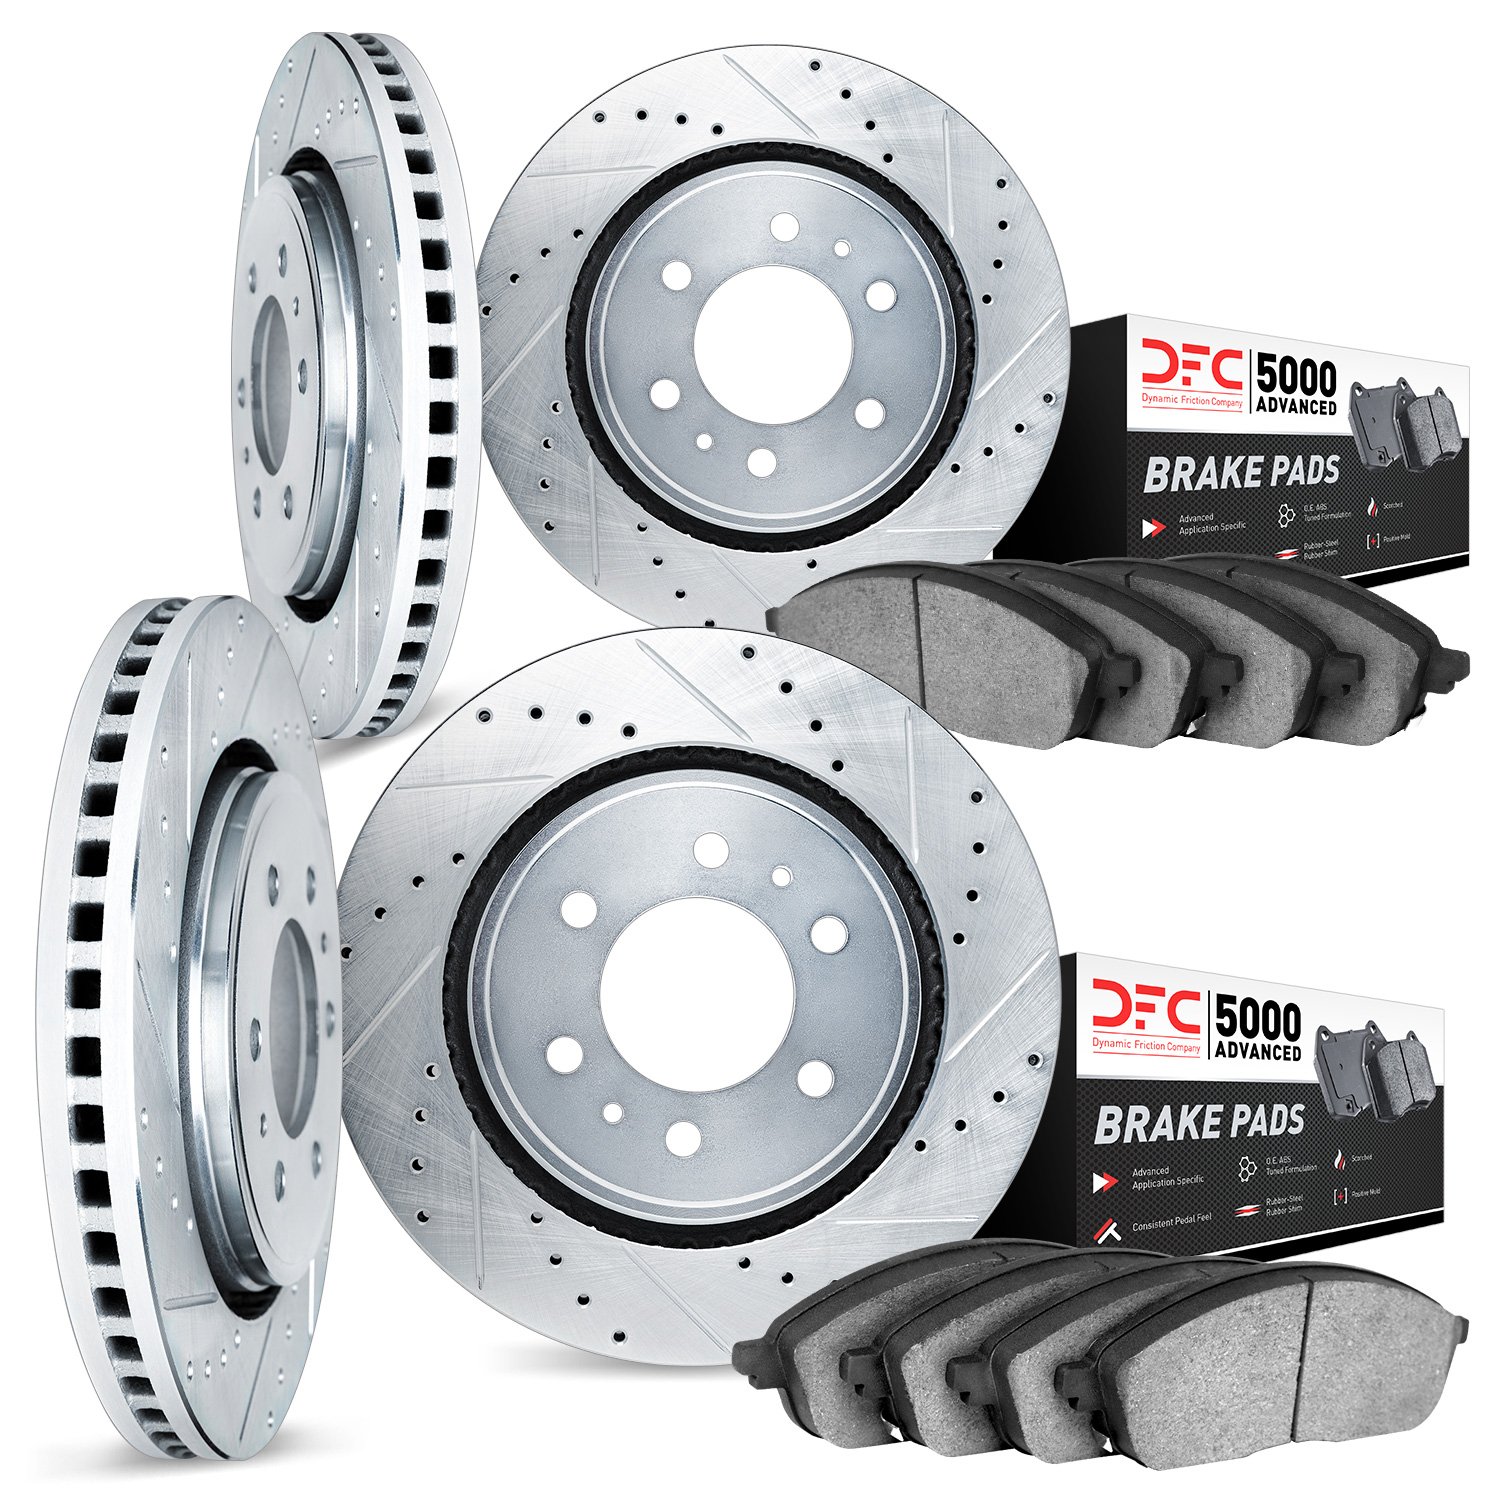 7504-48030 Drilled/Slotted Brake Rotors w/5000 Advanced Brake Pads Kit [Silver], 2009-2014 GM, Position: Front and Rear